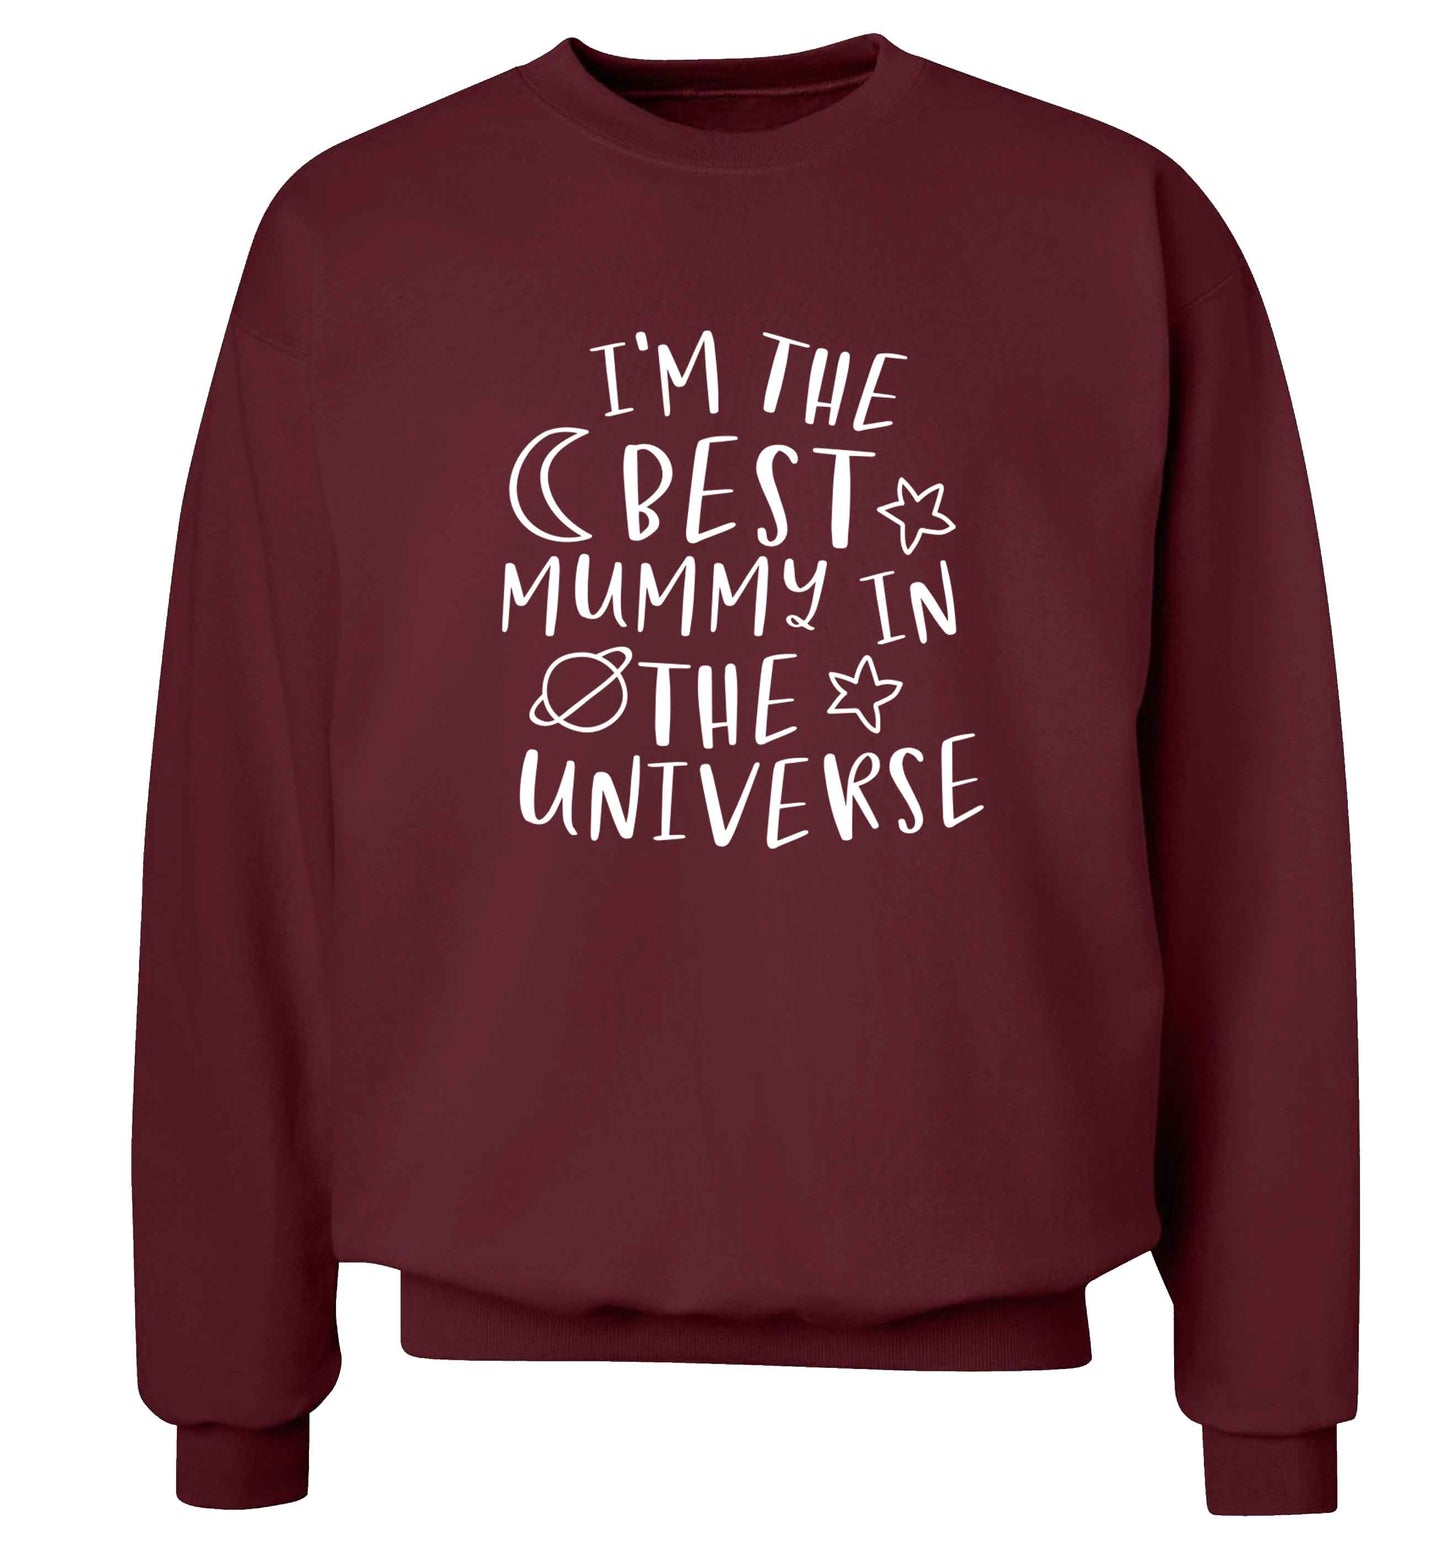 I'm the best mummy in the universe adult's unisex maroon sweater 2XL